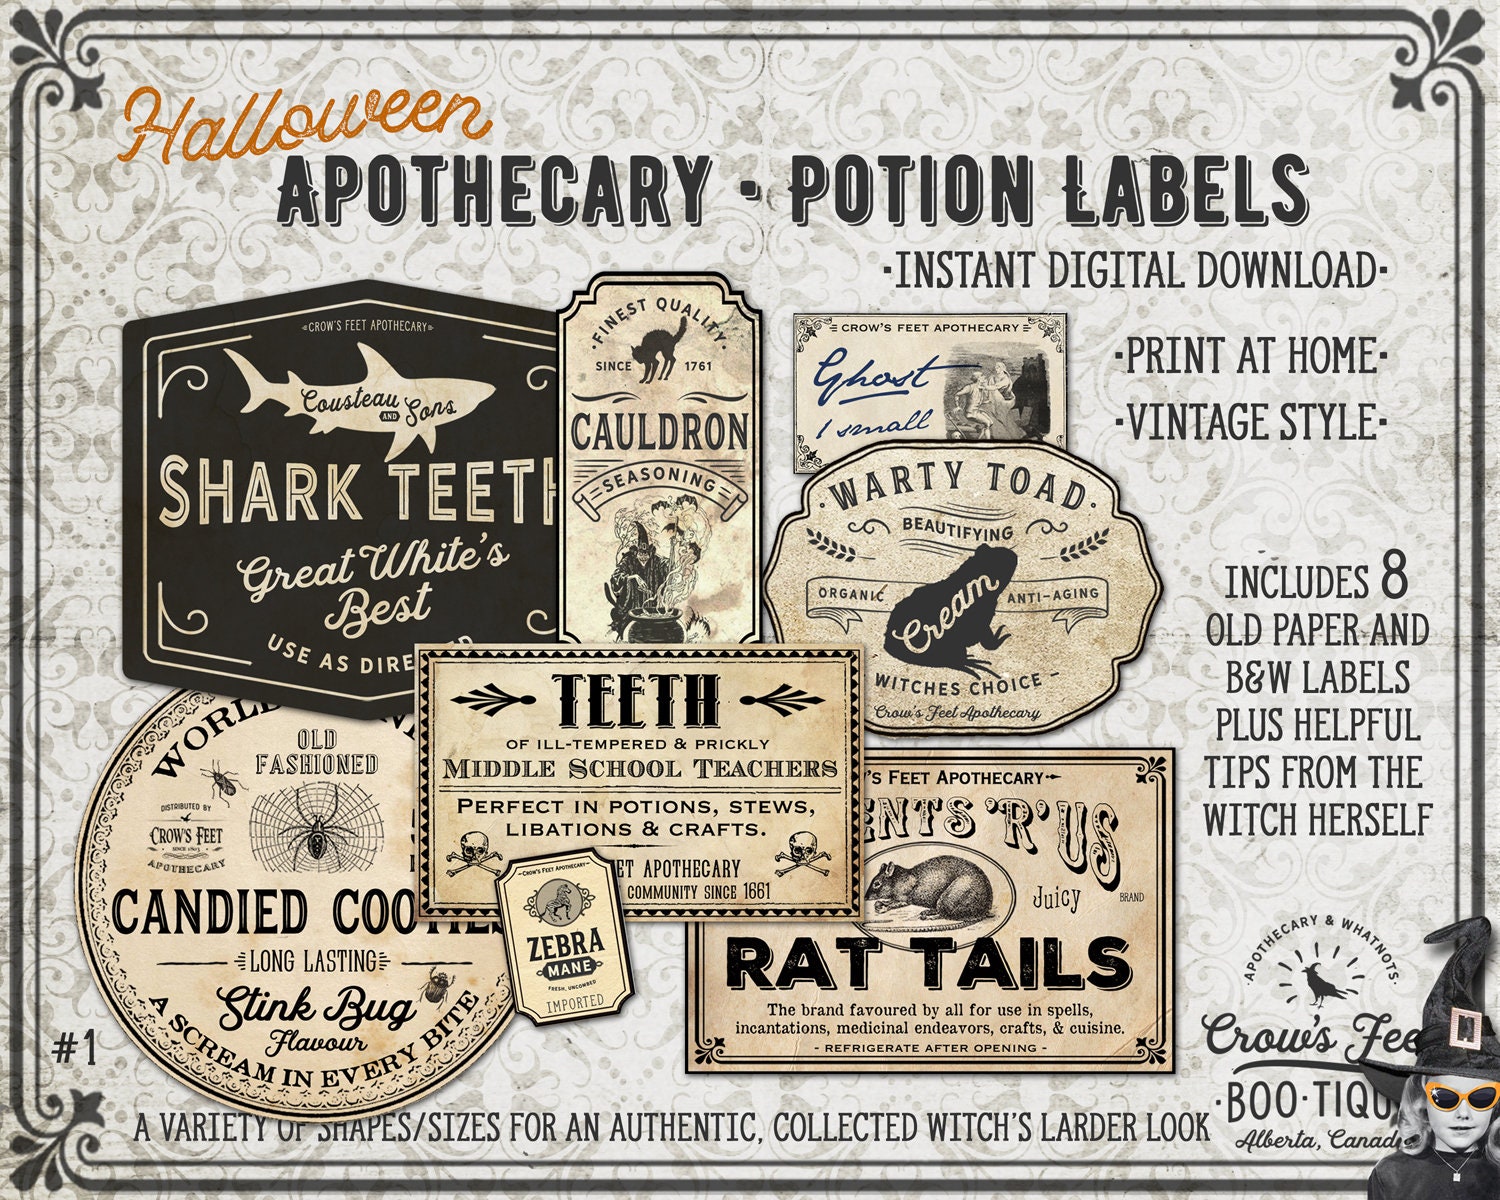 vintage look potion labels 1 halloween apothecary labels for etsy new zealand